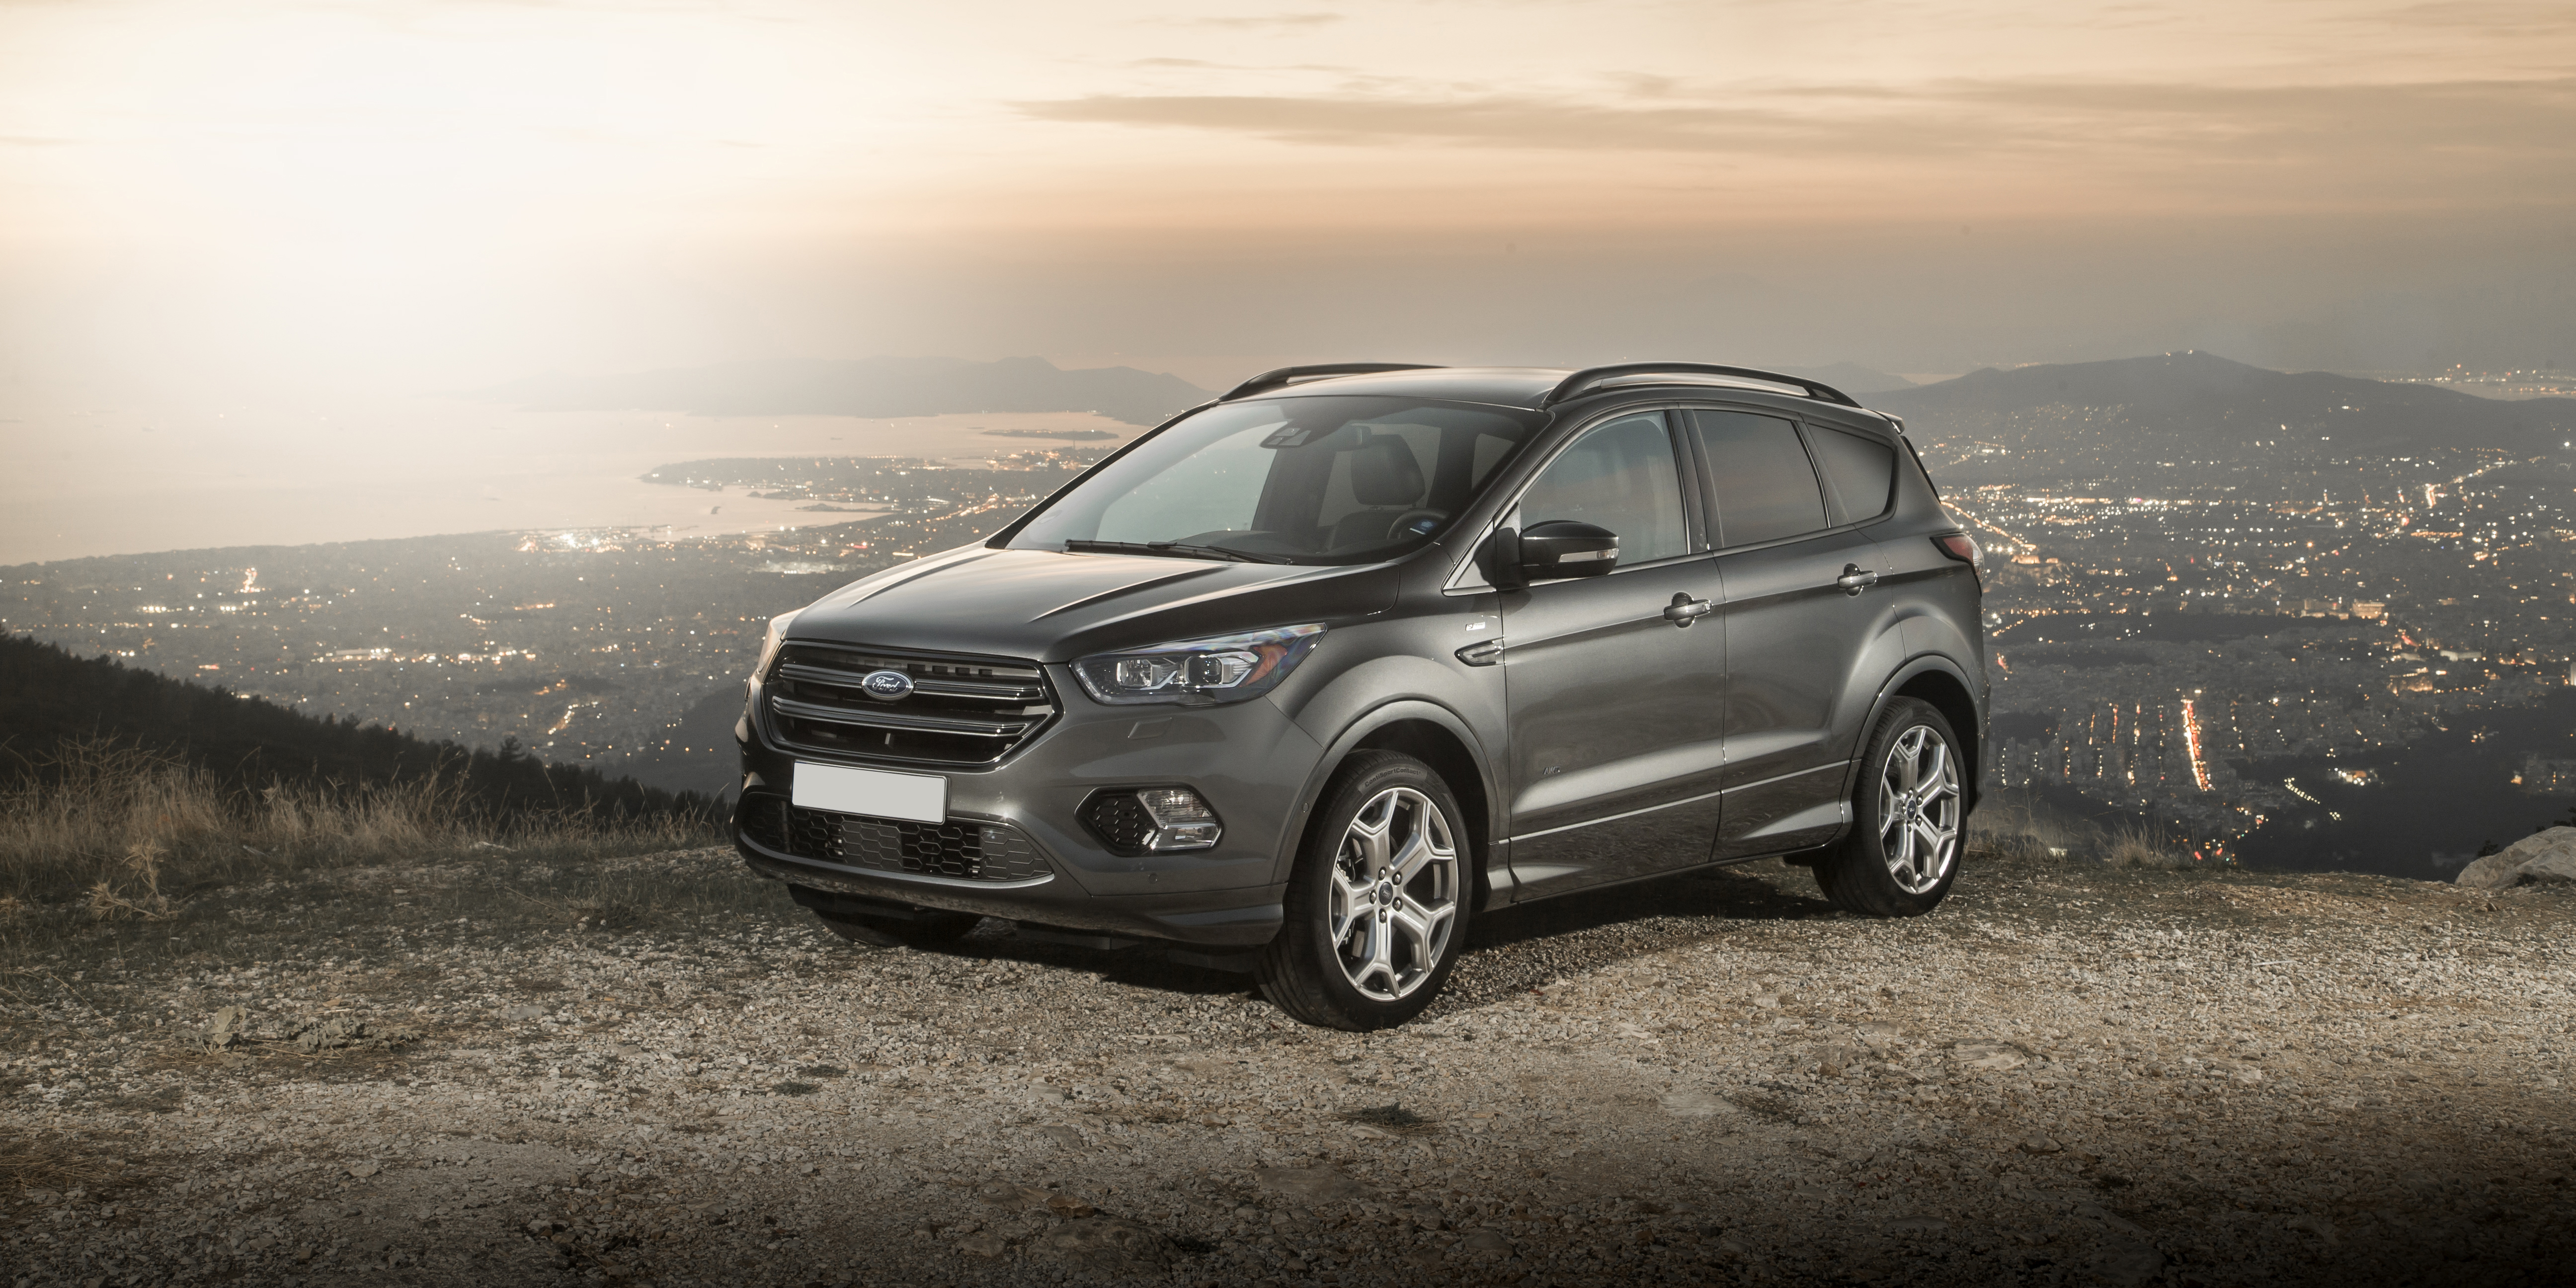 New Ford Kuga (2013-2016) Review, Drive, Specs & Pricing